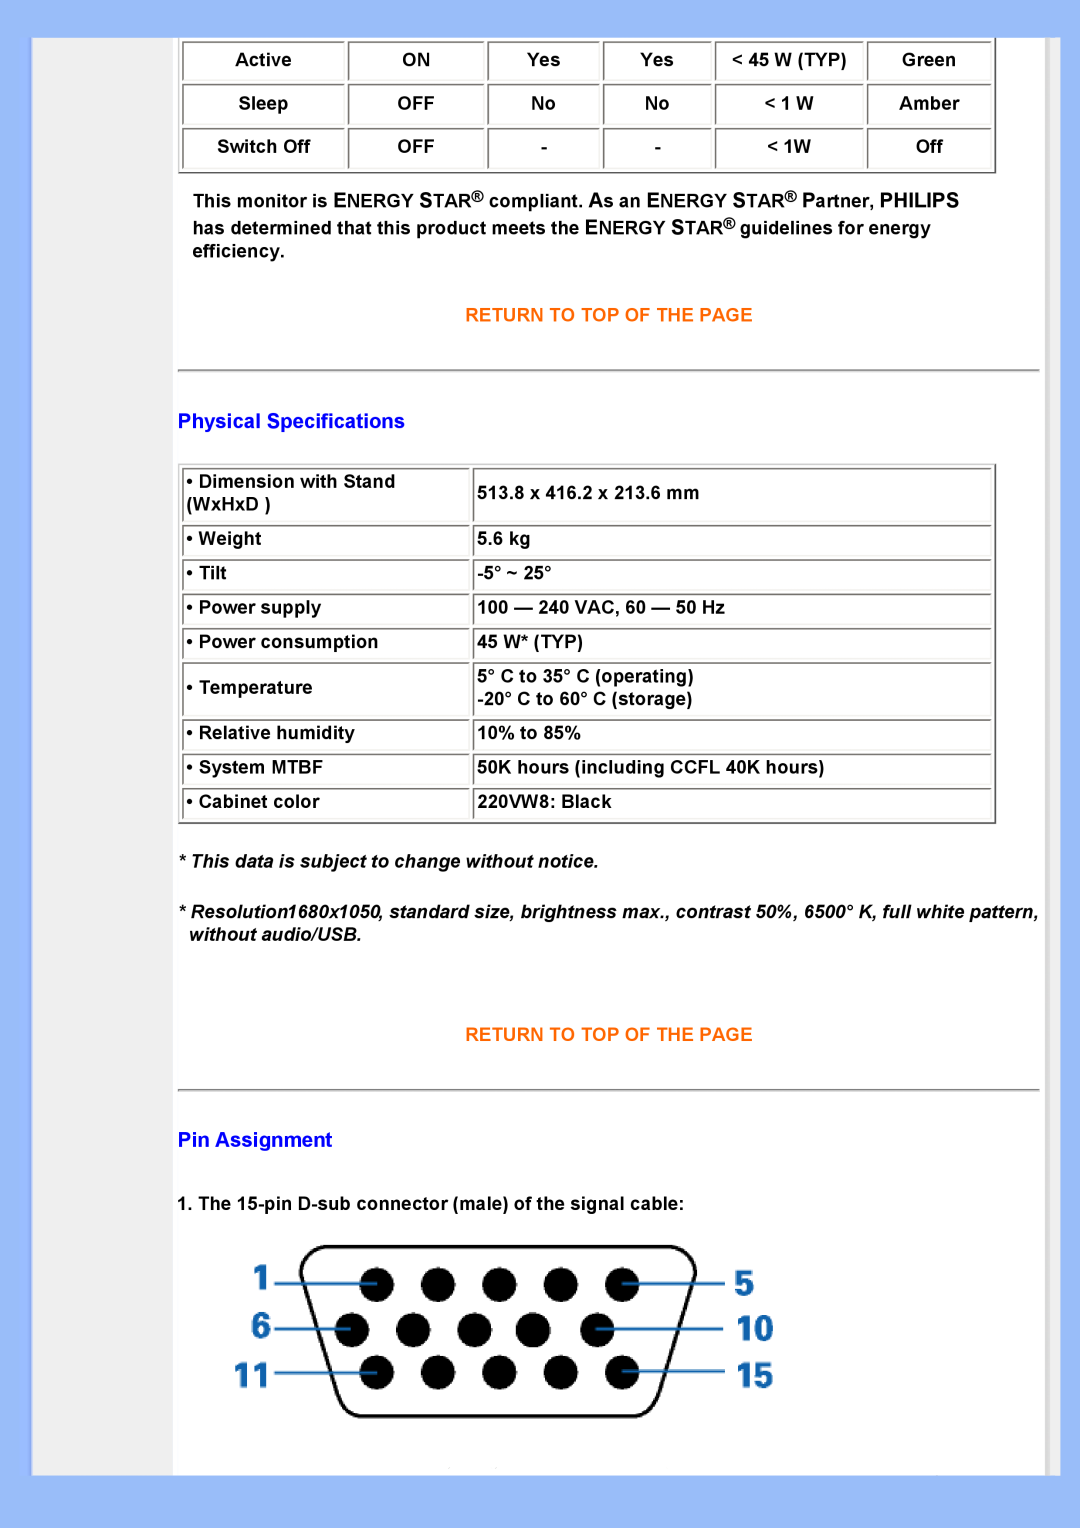 Philips 220VW8 user manual Physical Specifications, Pin Assignment, Return To Top Of The Page 